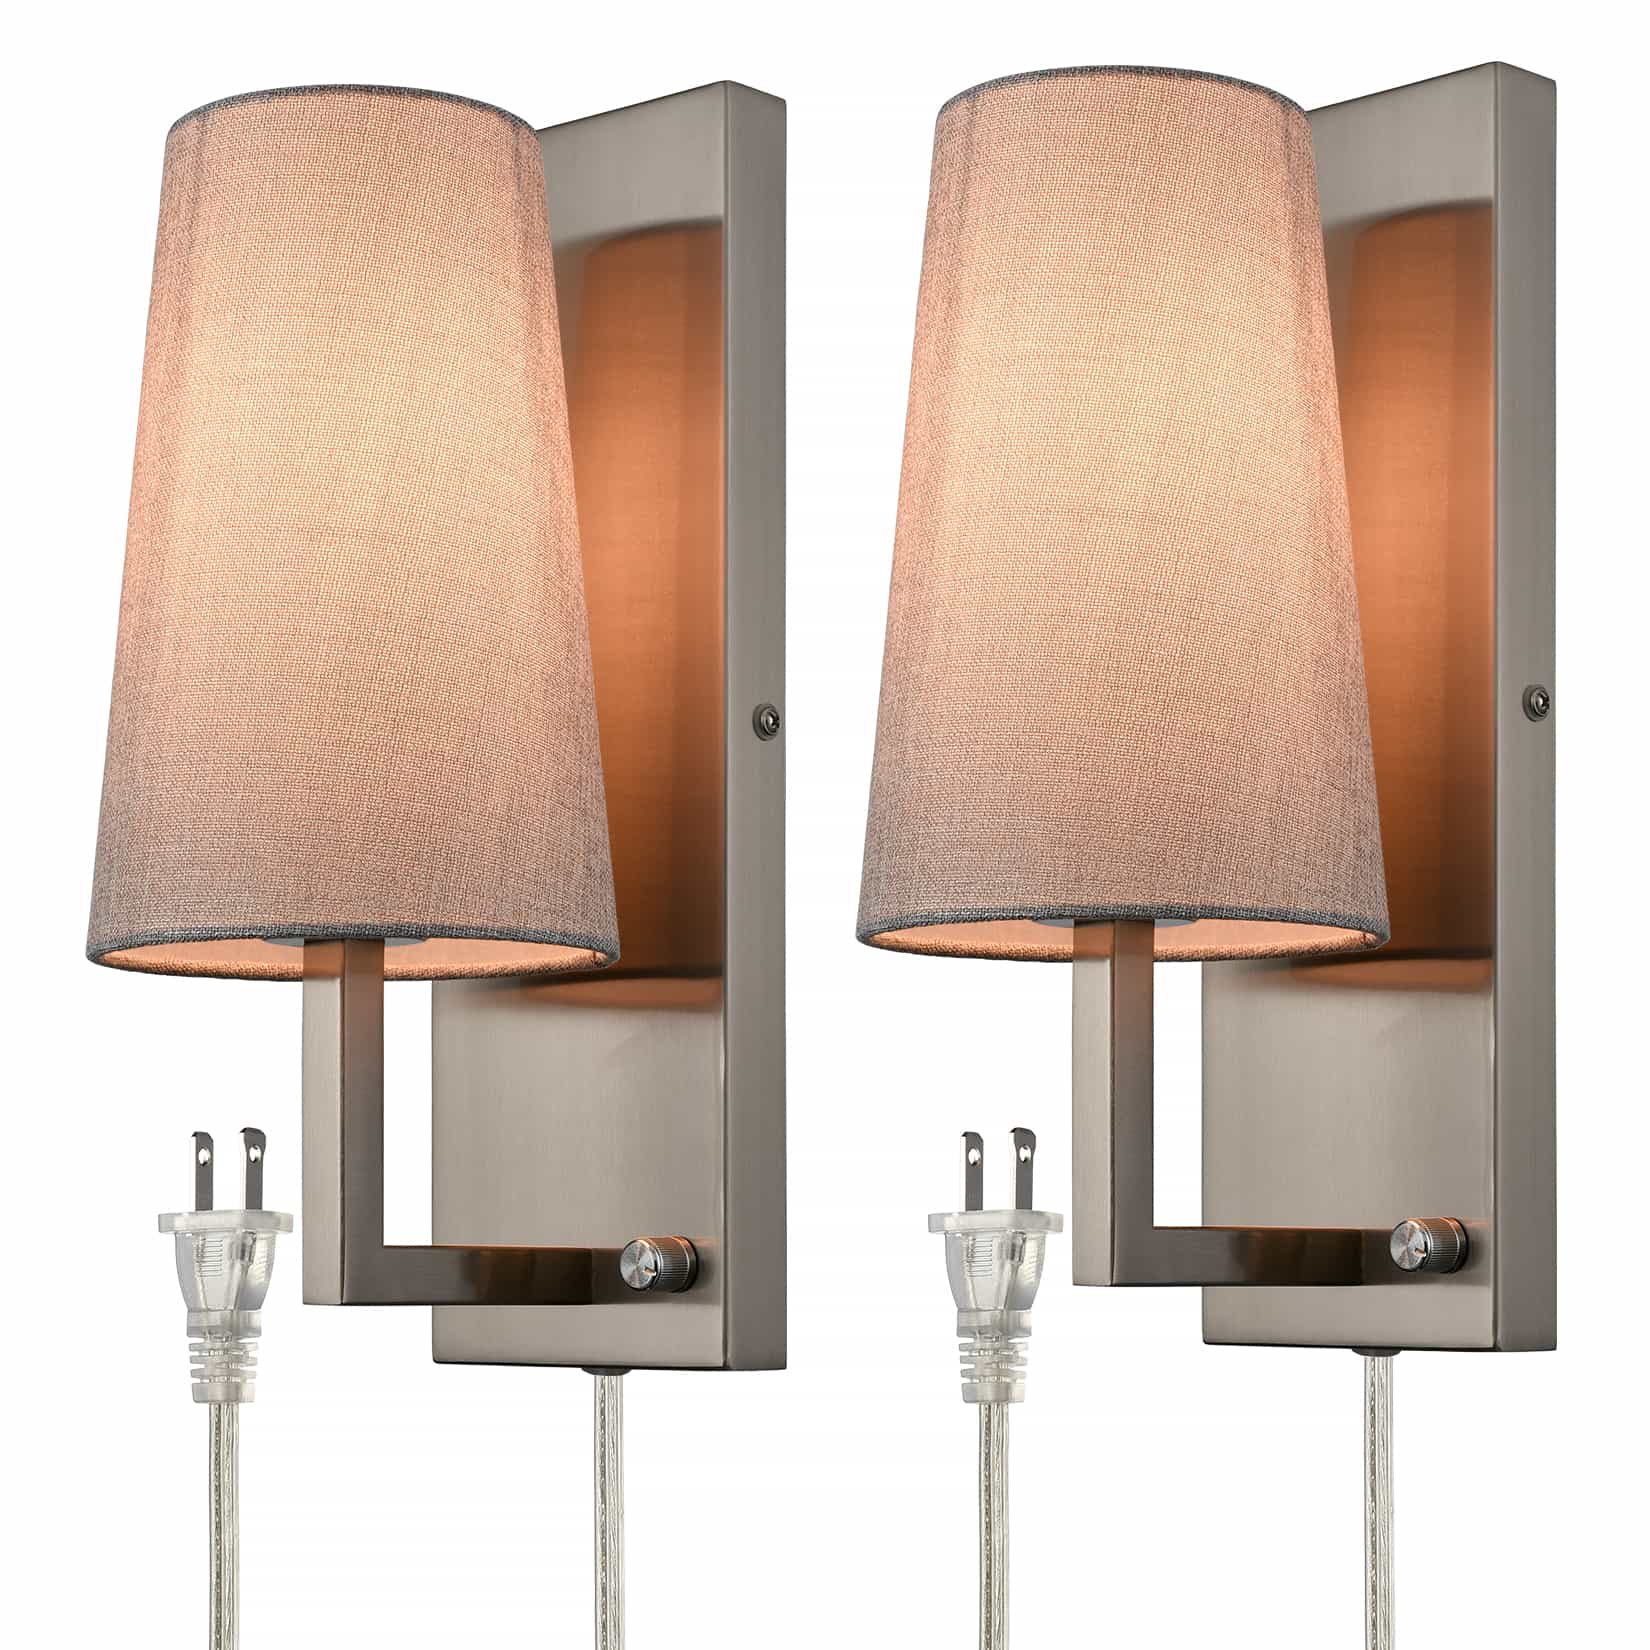 Brushed Nickel Plug in Wall Sconces Modern Dimmable Wall Lamps